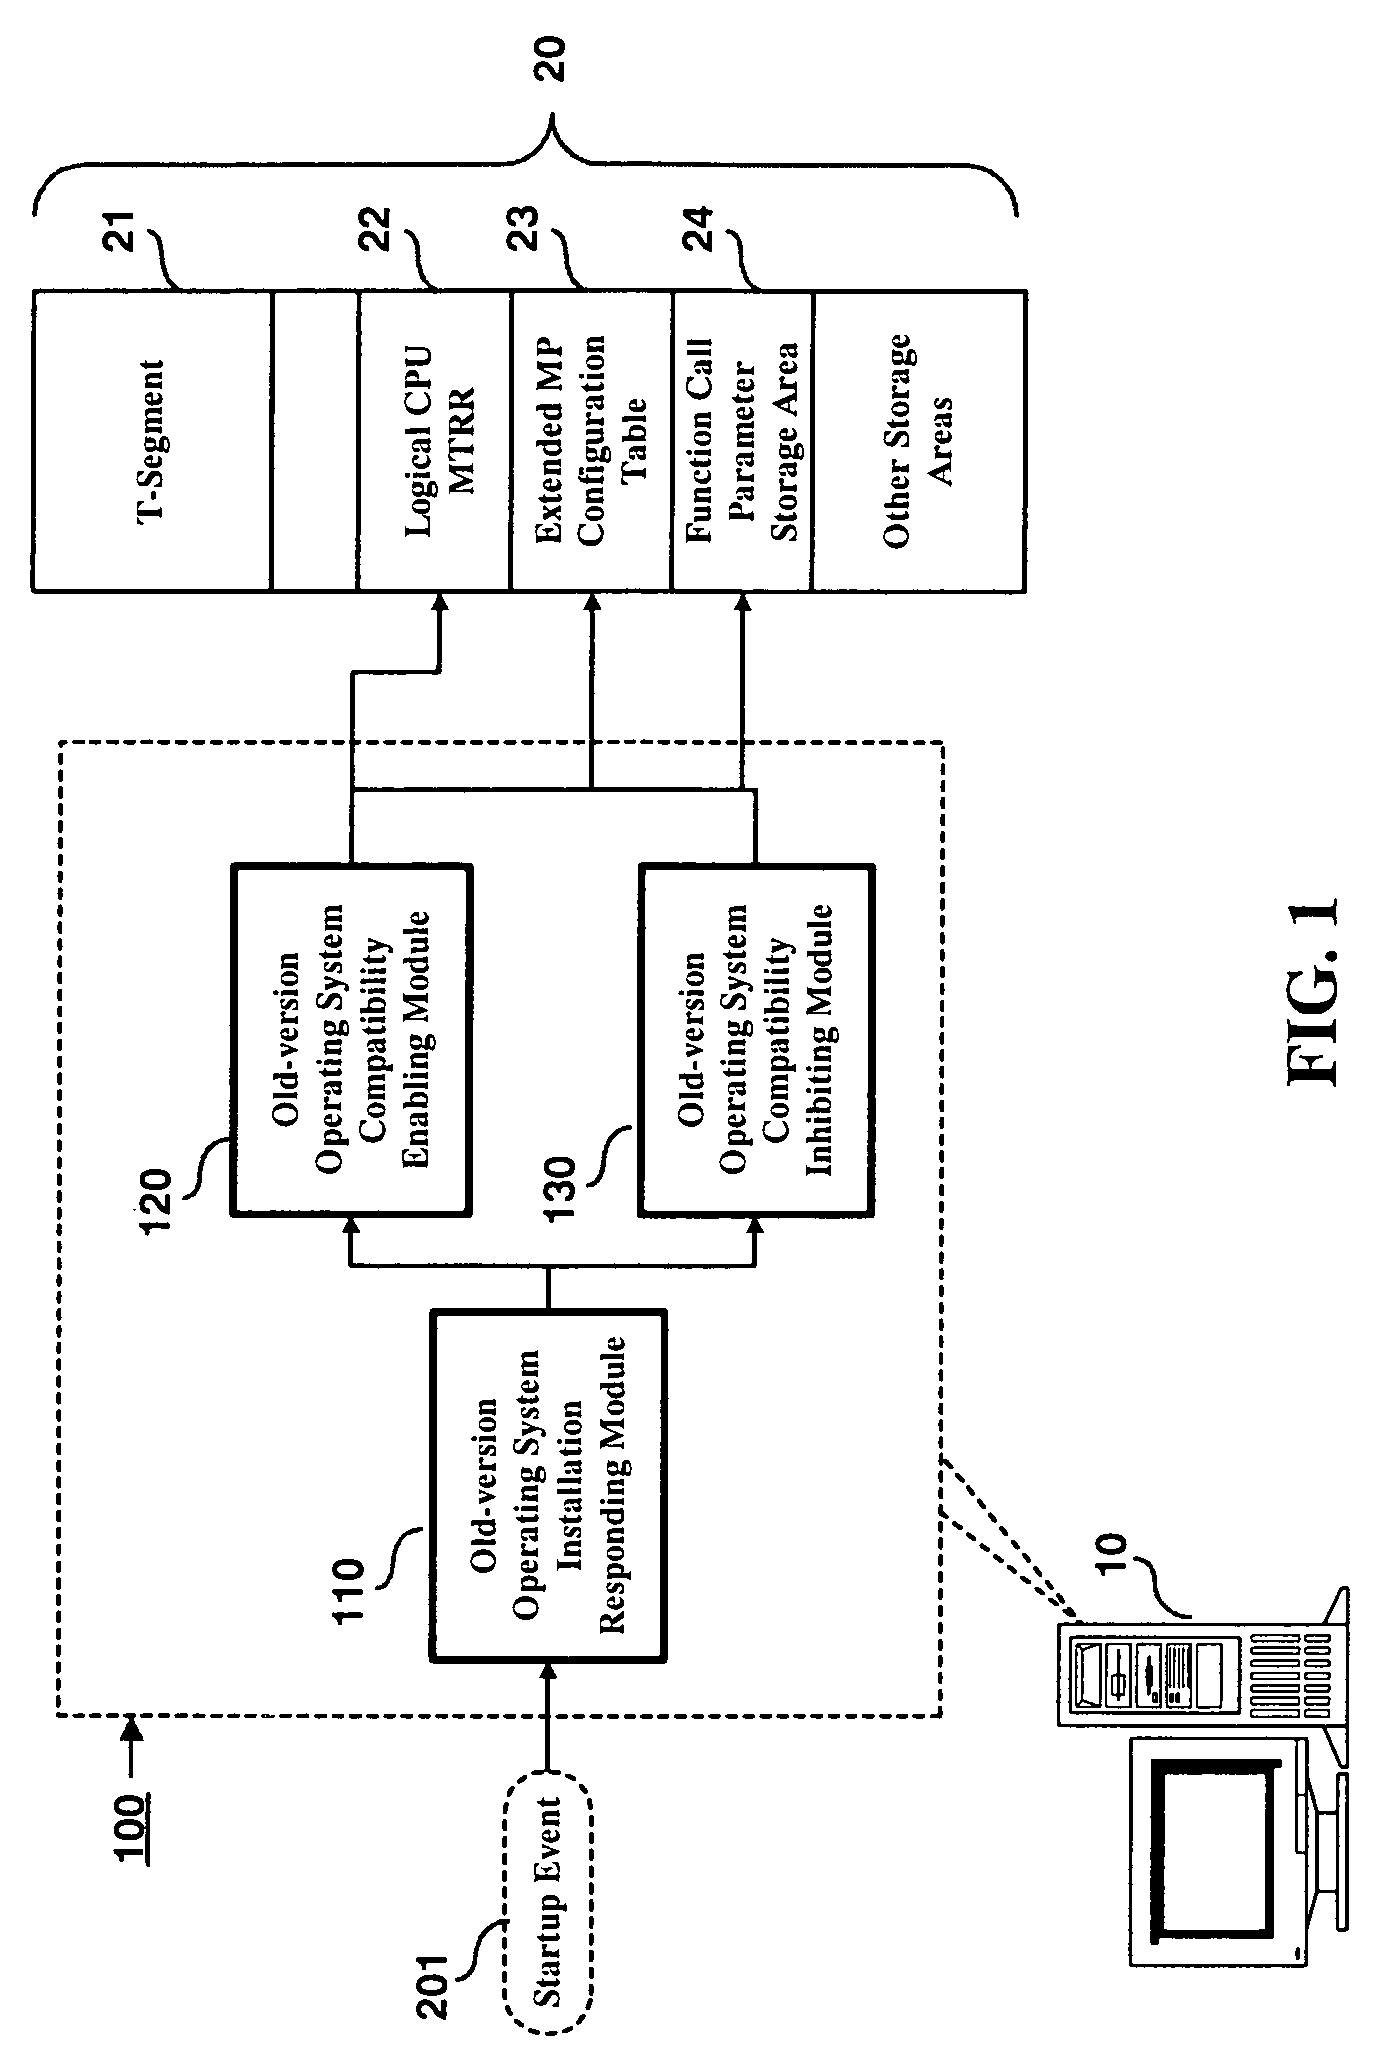 Computer platform operating system compatibility management method and system